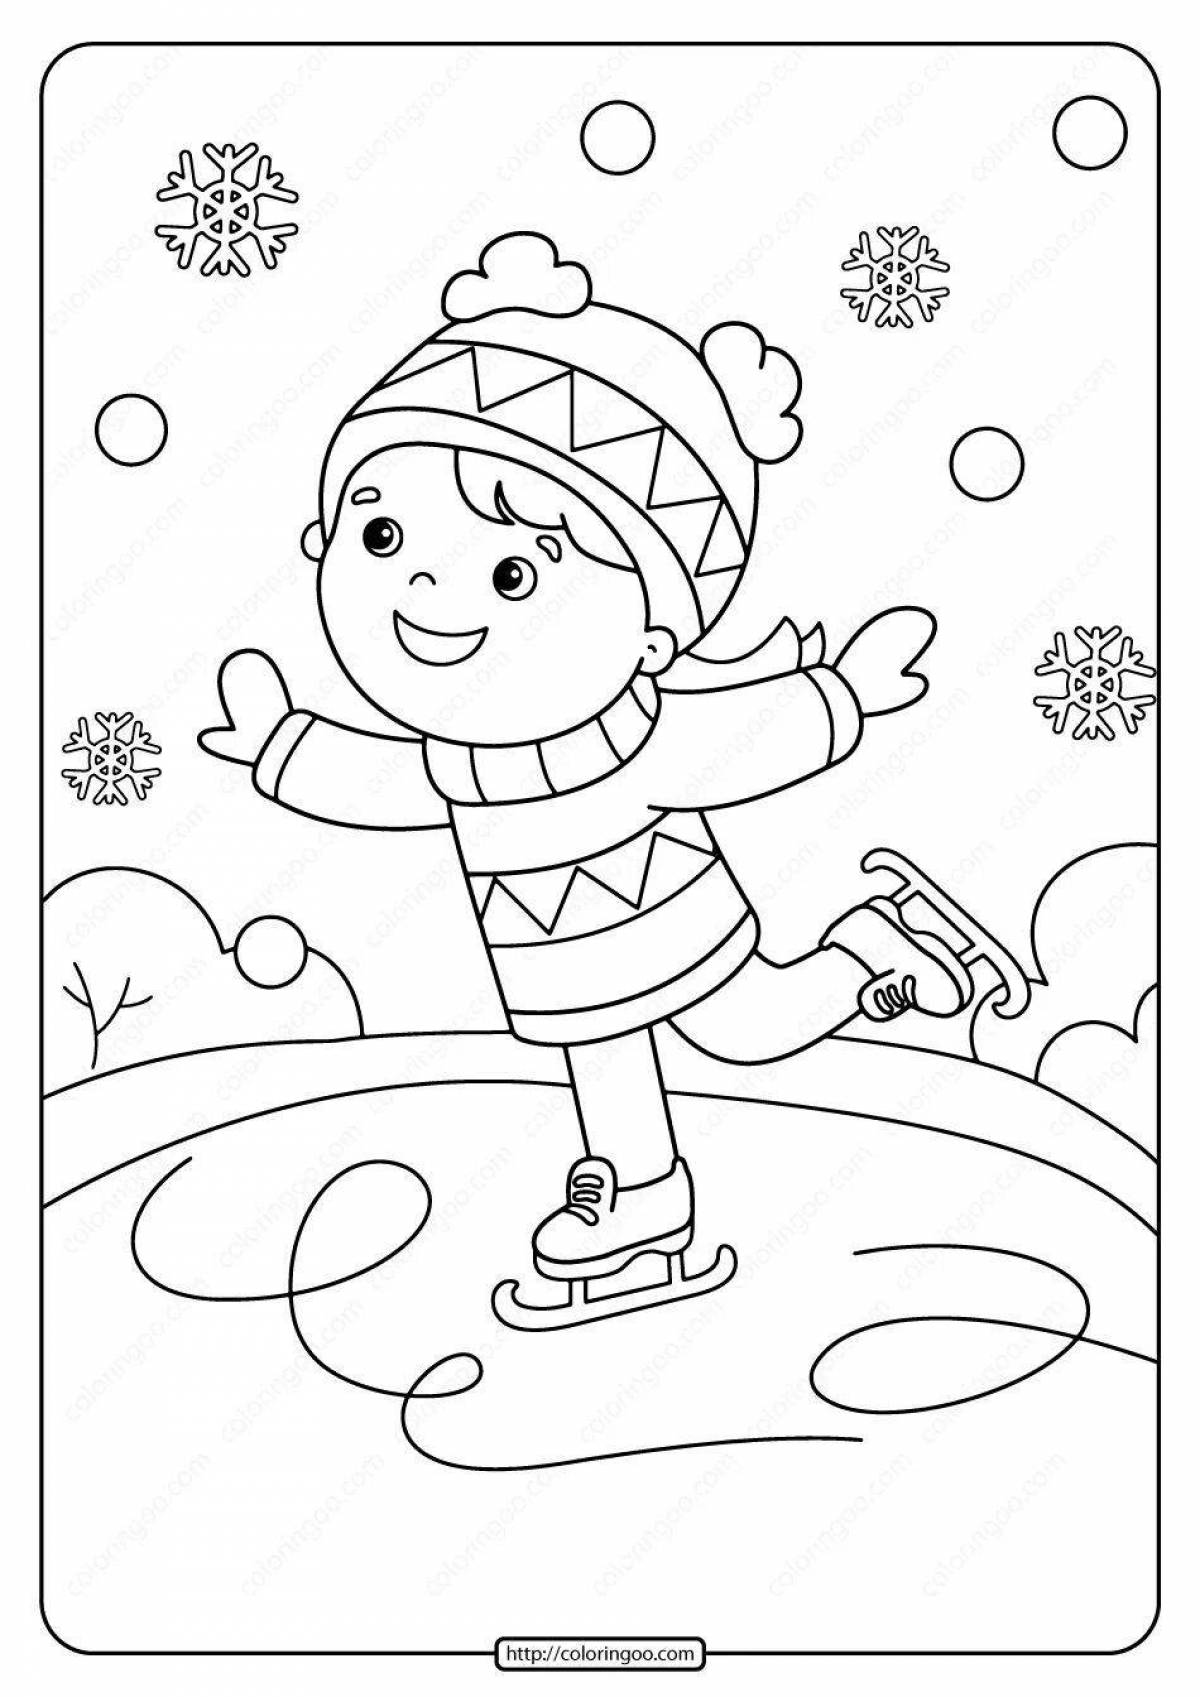 Fabulous winter sports coloring pages for preschoolers